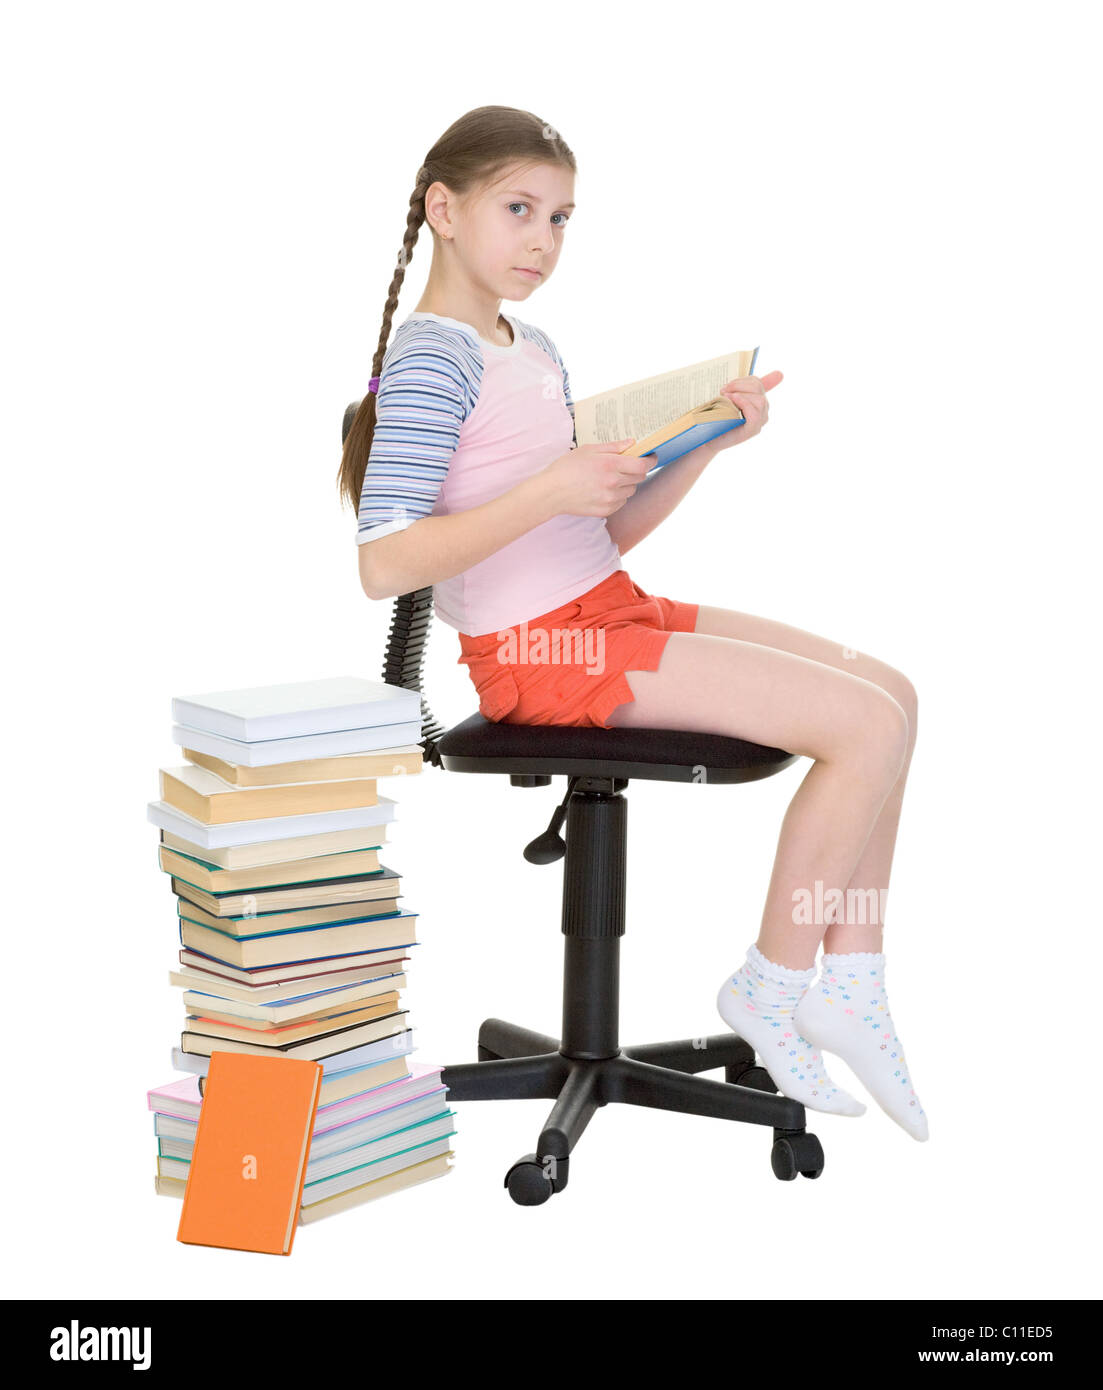 Schoolgirl learns lessons near big pile of textbooks Stock Photo